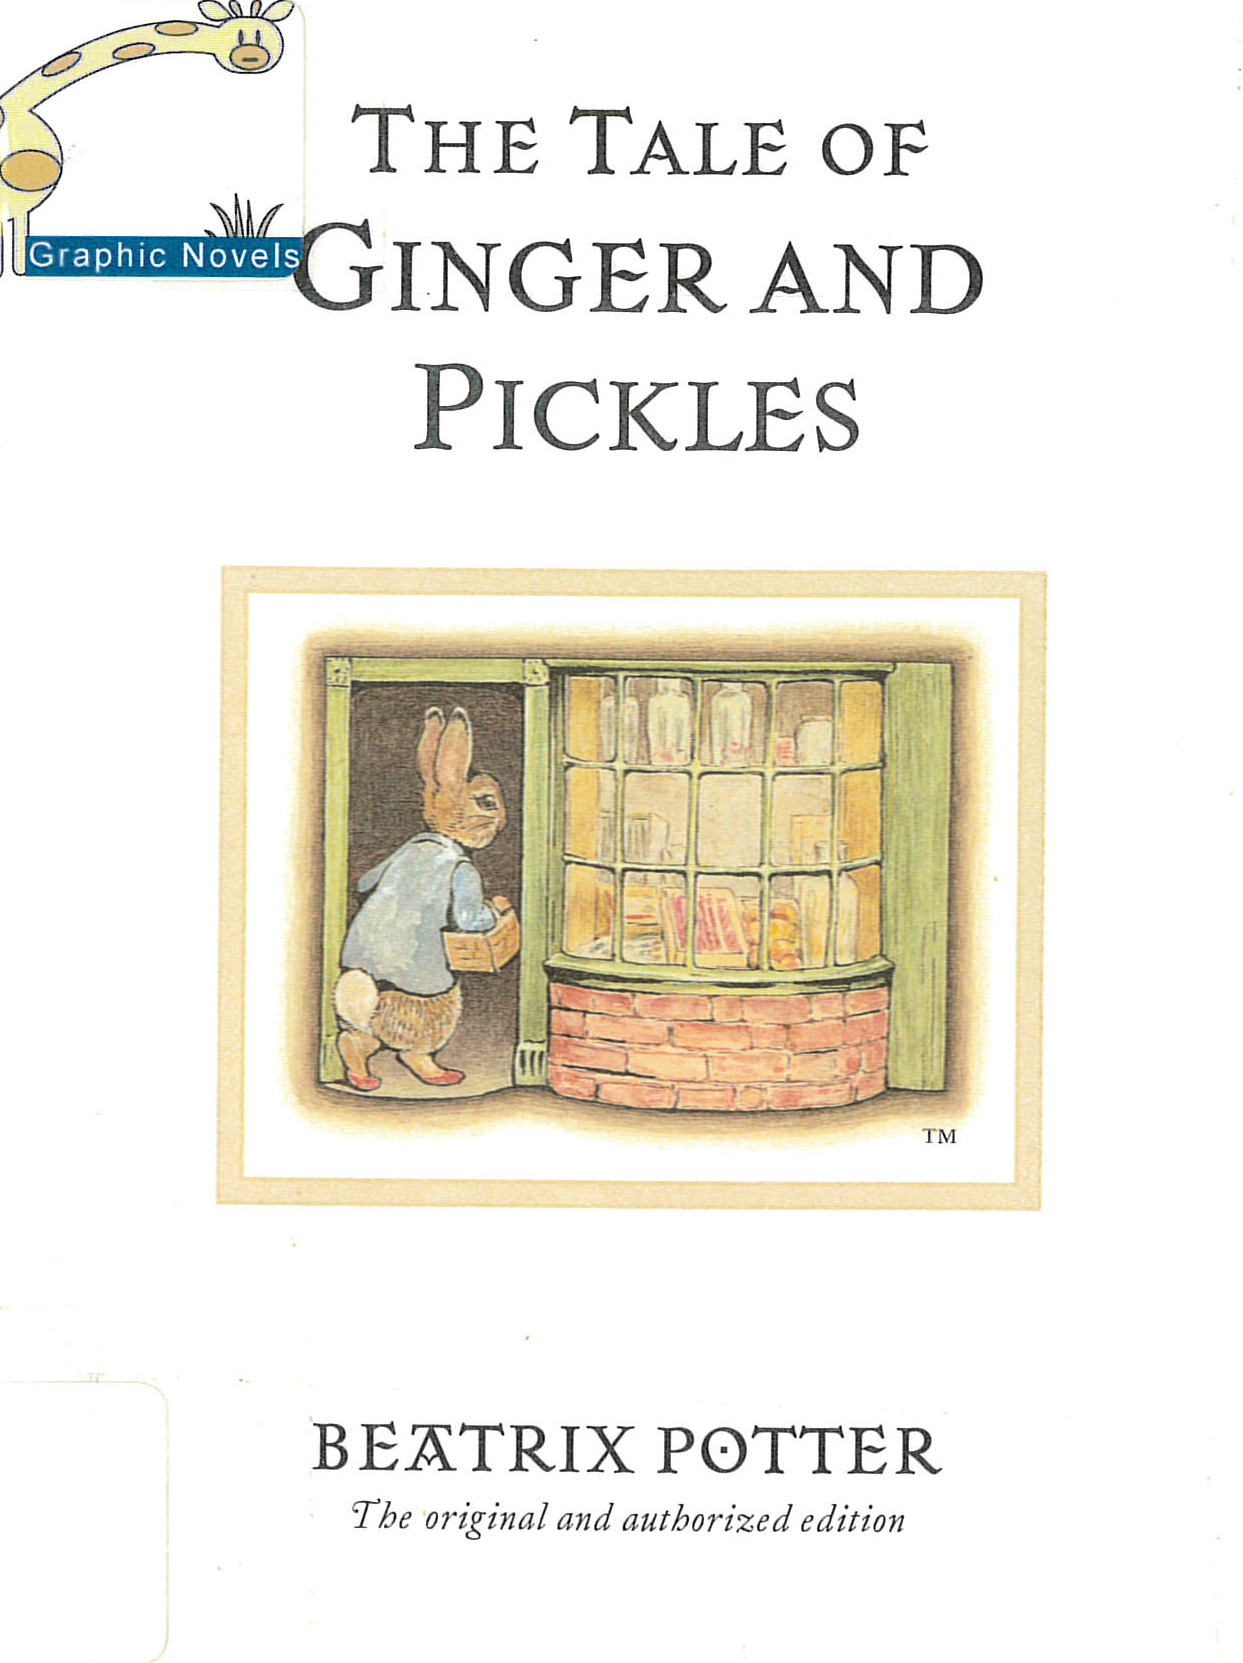 The tale of Ginger and Pickles